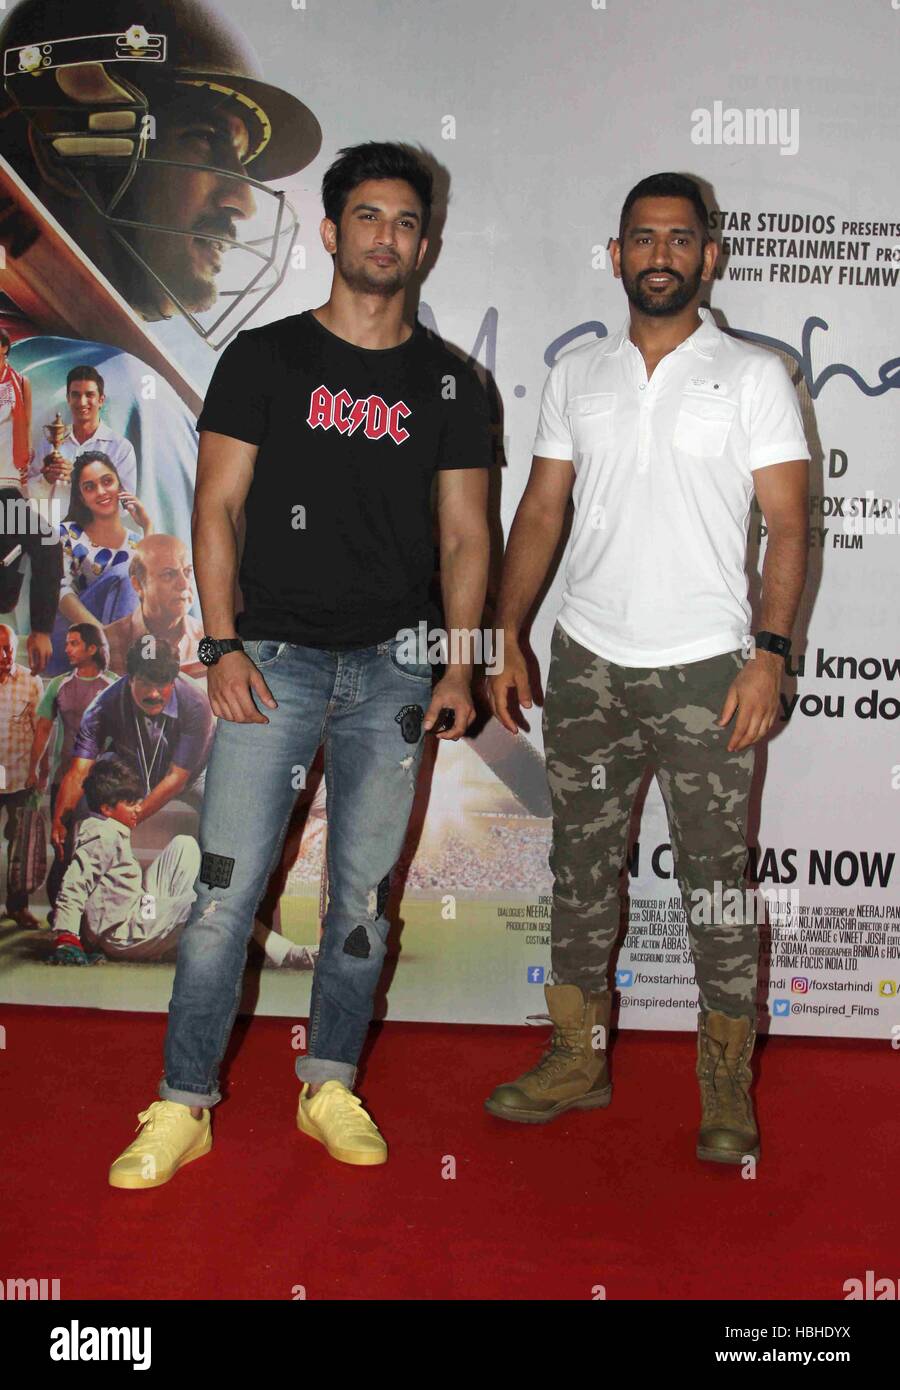 Sushant Singh Rajput ; Indian Bollywood actor with Indian cricket player Mahendra Singh Dhoni at promotion of film M S Dhoni in Mumbai India Asia Stock Photo